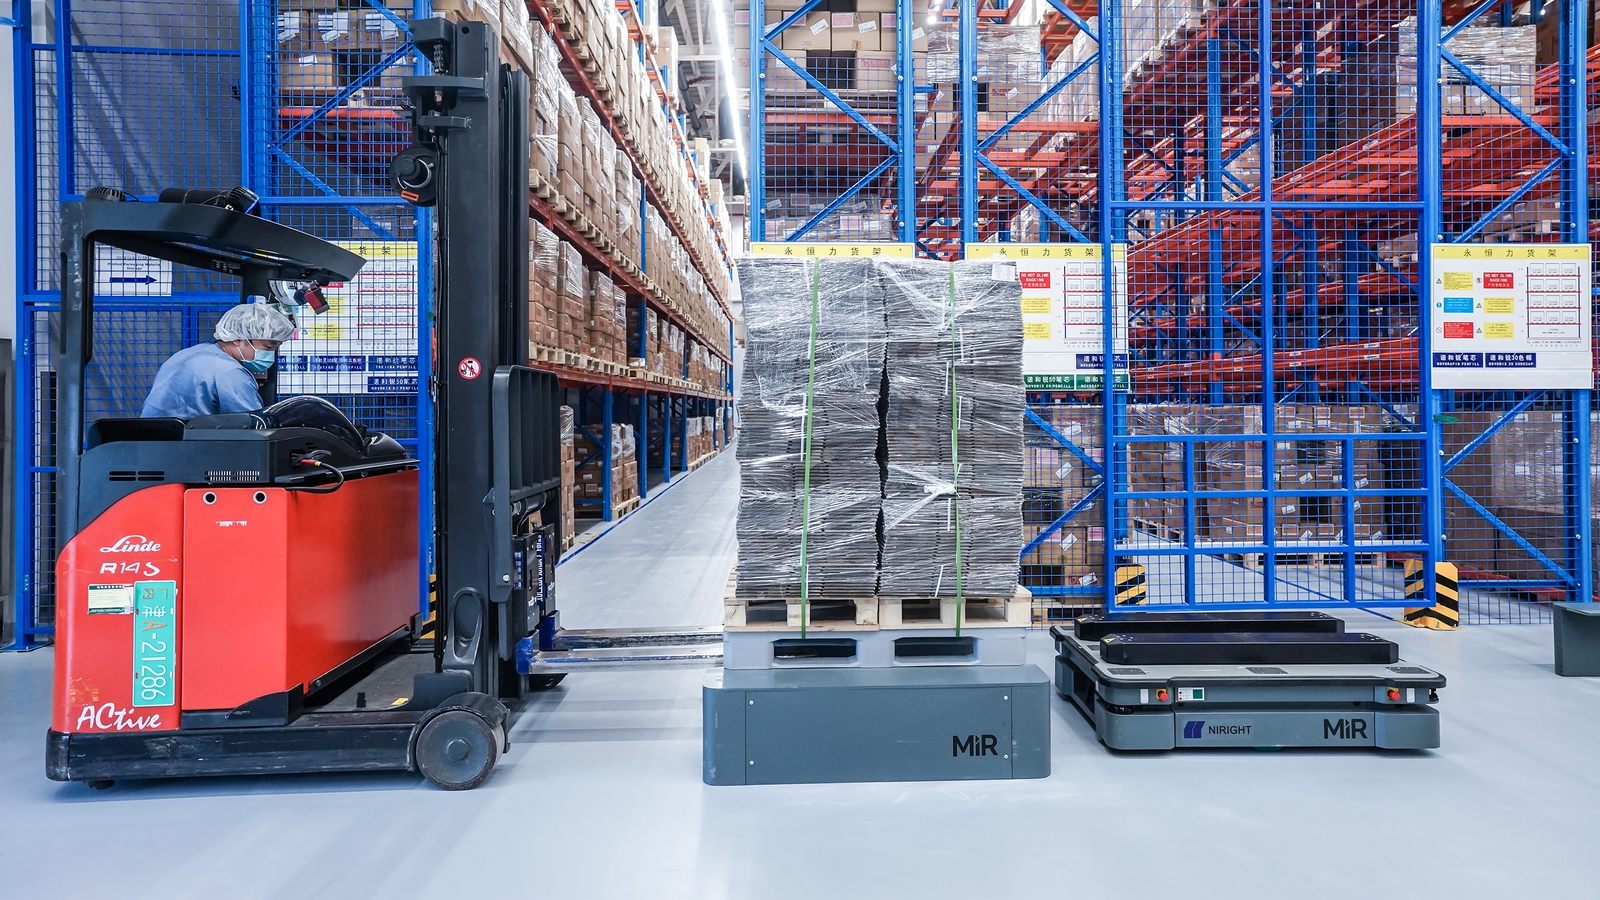 AI-equipped Robots Help Logistics Industry to Fight Labor Shortages -  International Federation of Robotics